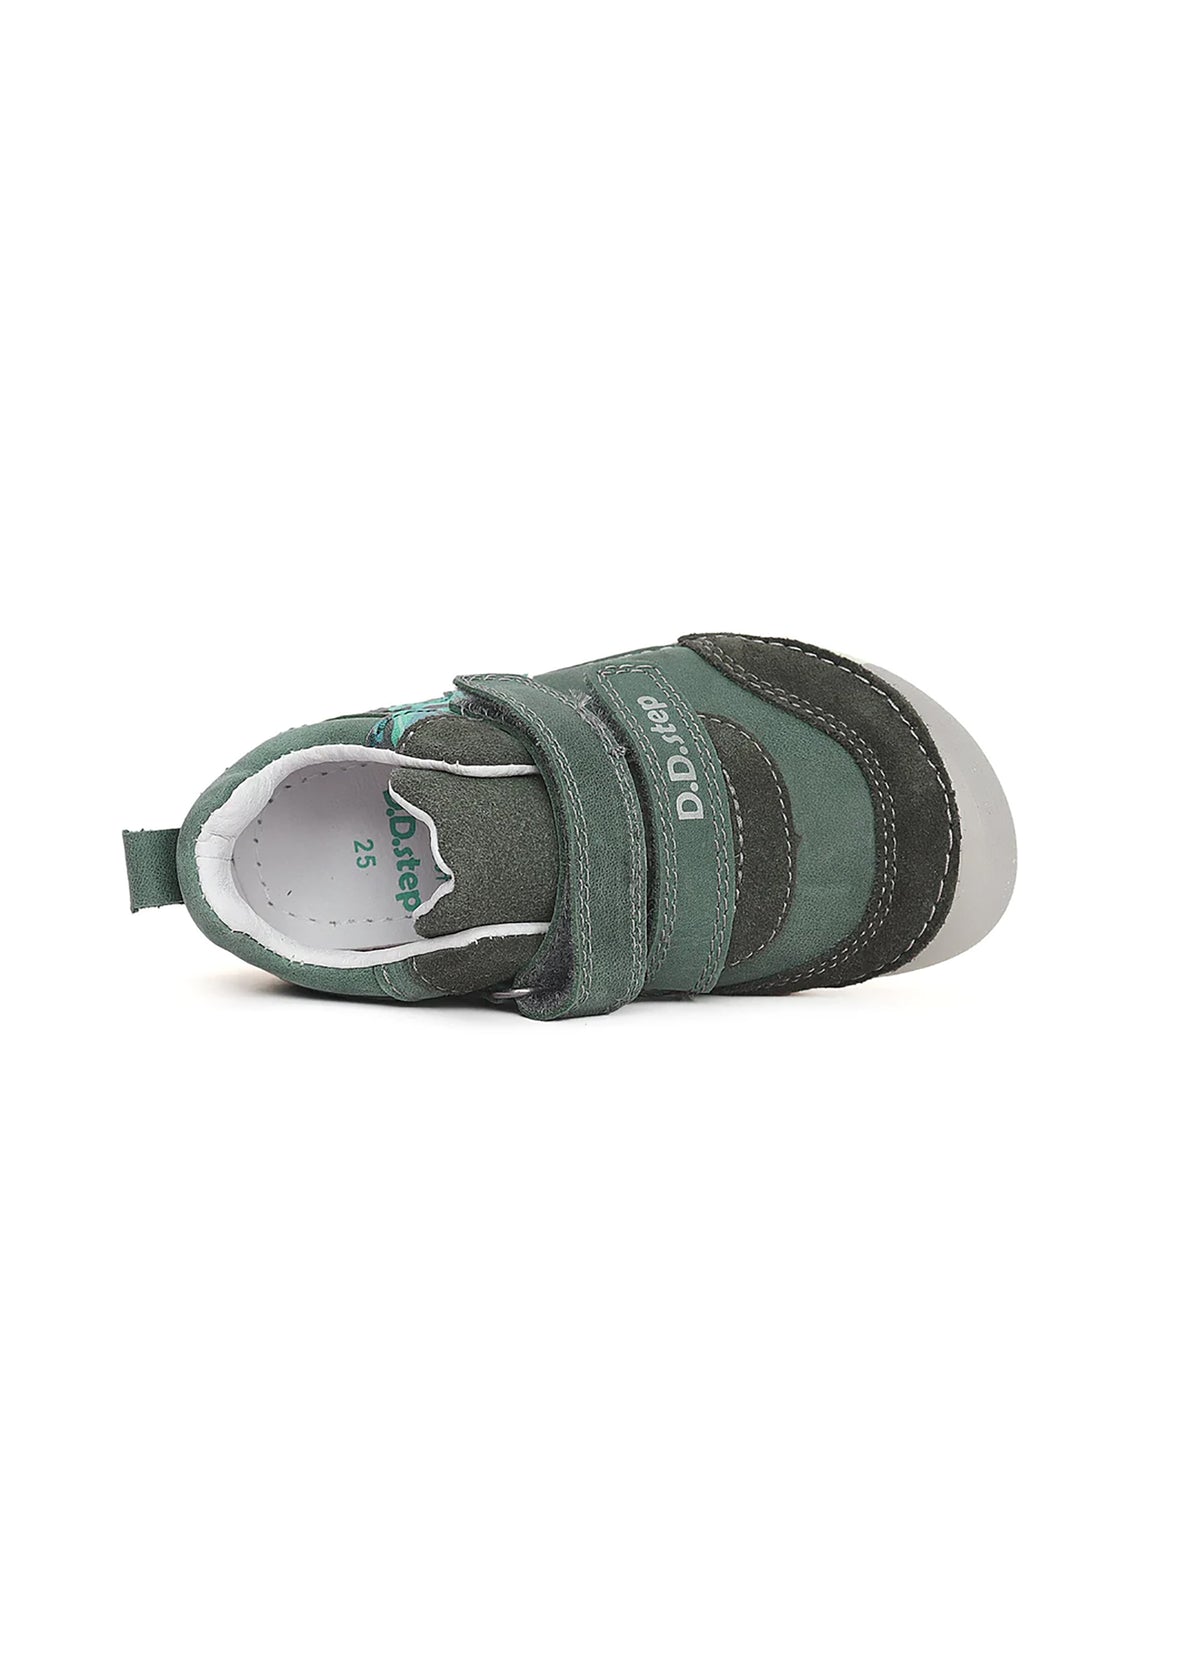 Children's barefoot sneakers - green leather, blue patterned stripe and sole